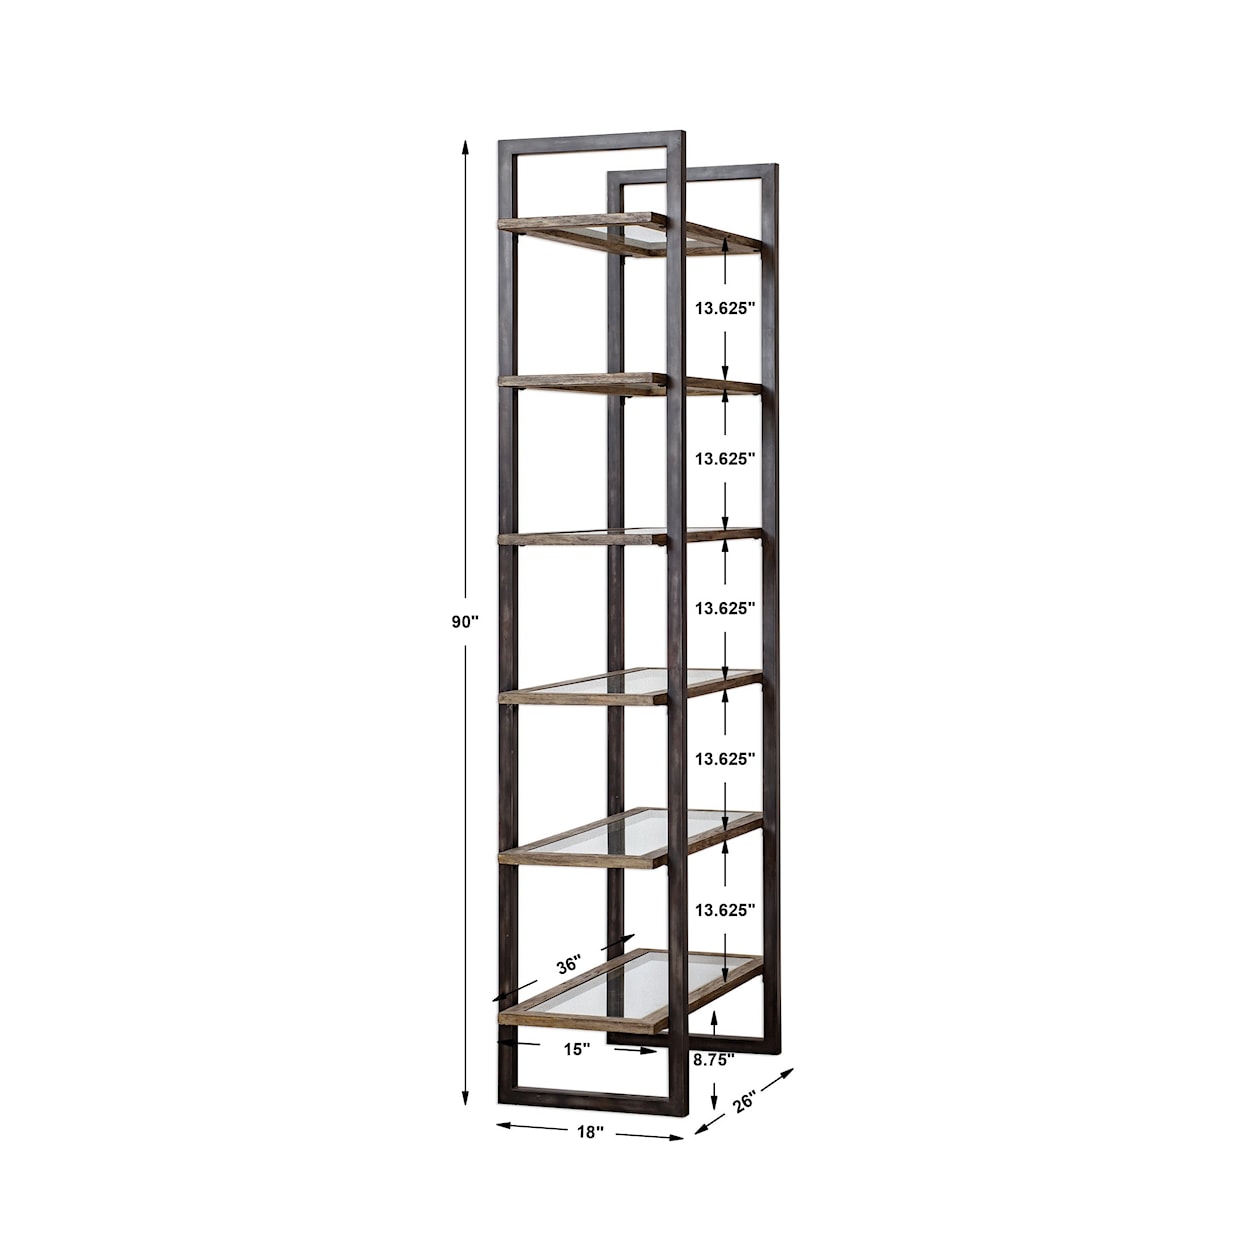 Uttermost Accent Furniture - Bookcases Olwyn Industrial Etagere